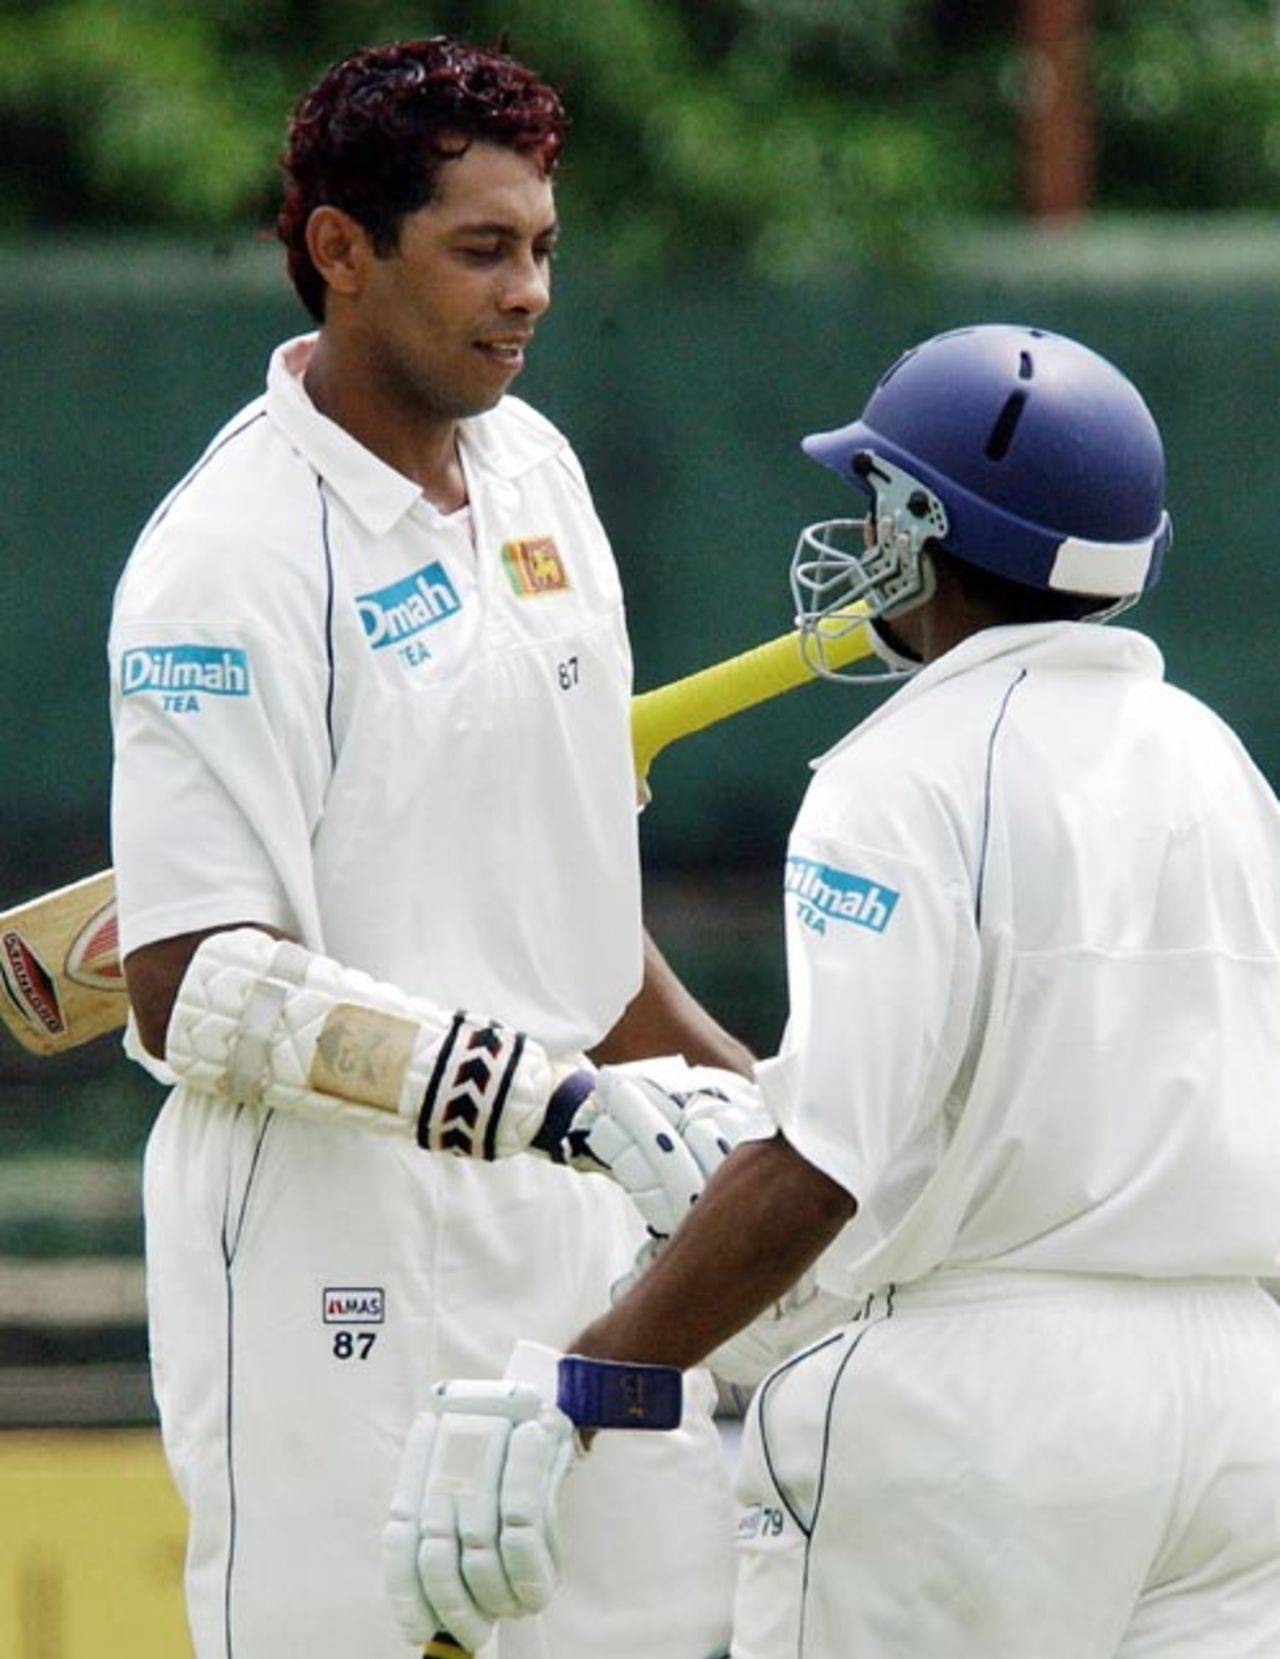 Michael Vandort is congratulated by Tilakaratne Dilshan after reaching his century, Sri Lanka v Bangladesh, 1st Test, Colombo, 2nd day, June 26, 2007